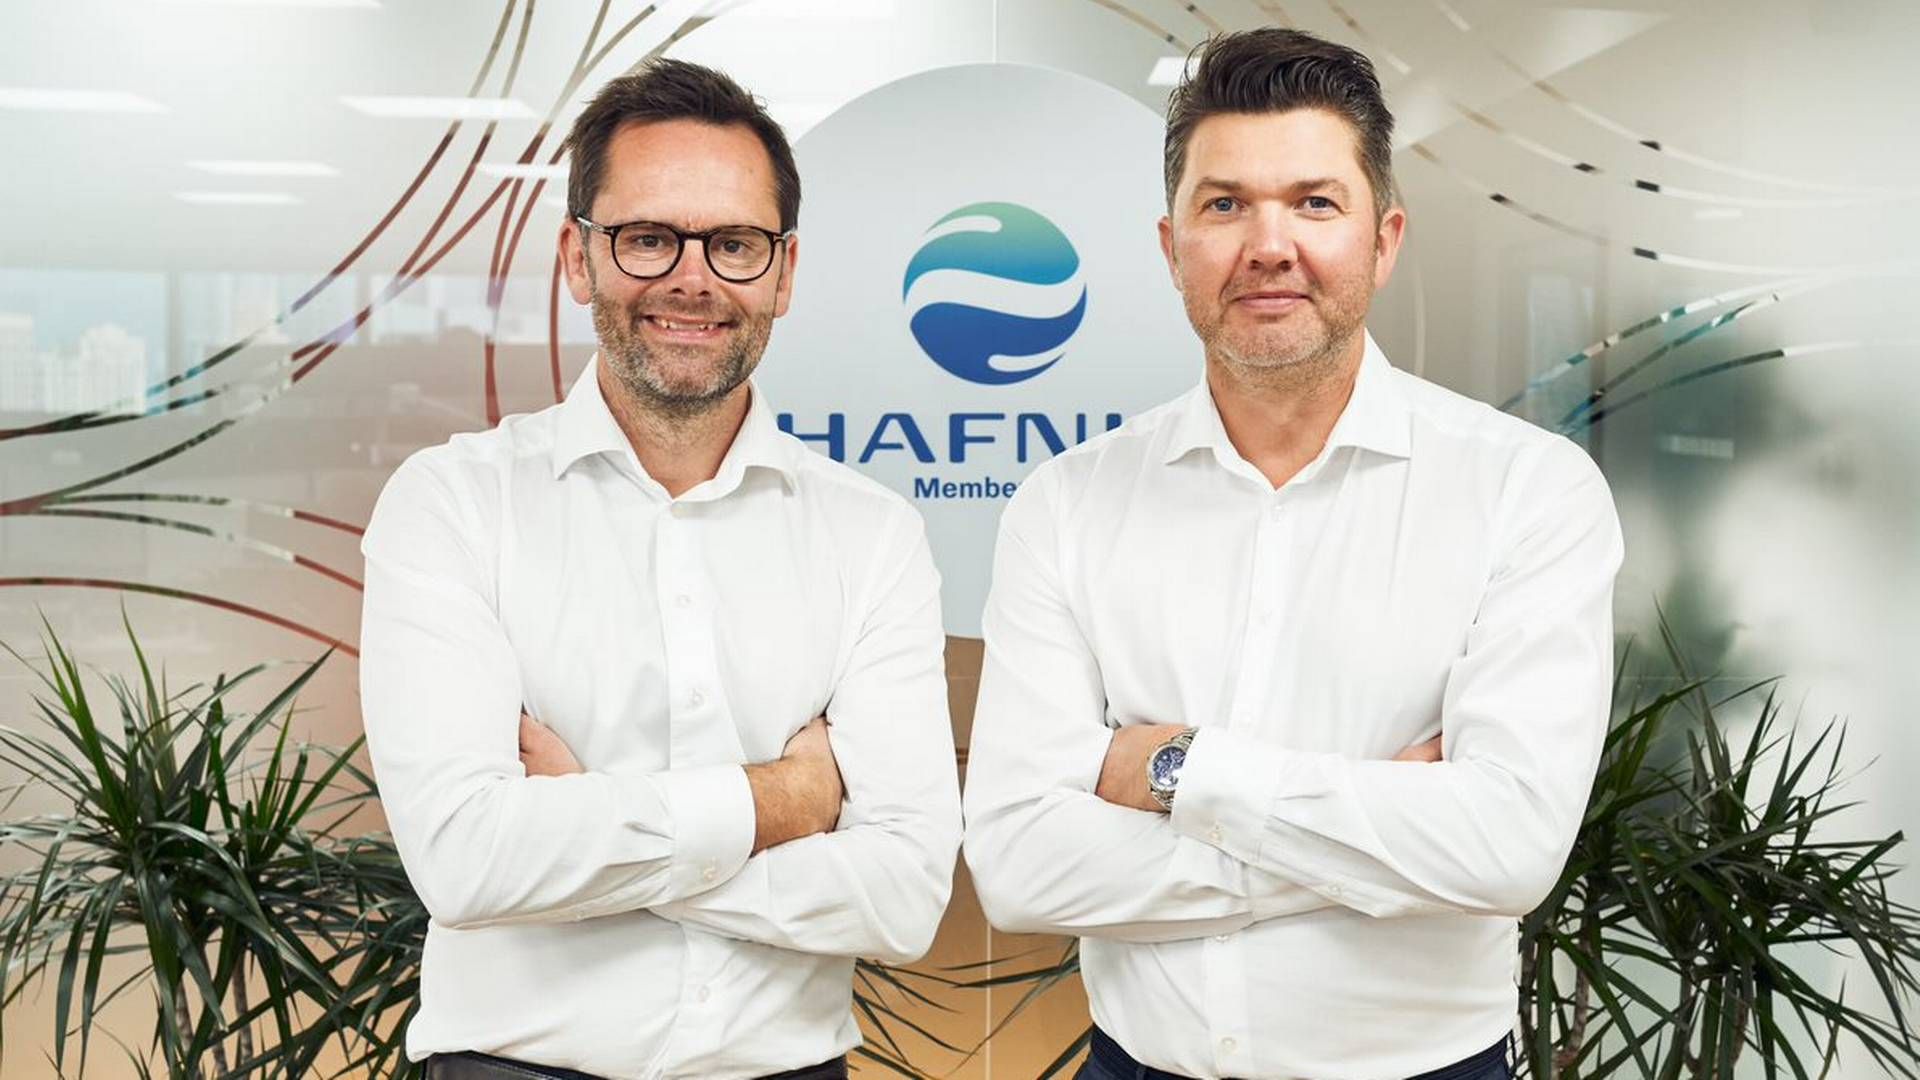 It is a net positive for carriers of the bunker alliance that Hafnia also makes purchases for its own ships, says VP Head of Bunkers Peter Martin Grünwaldt (right). On the left is Bjørn Møller, key account manager of the alliance. | Photo: Hafnia